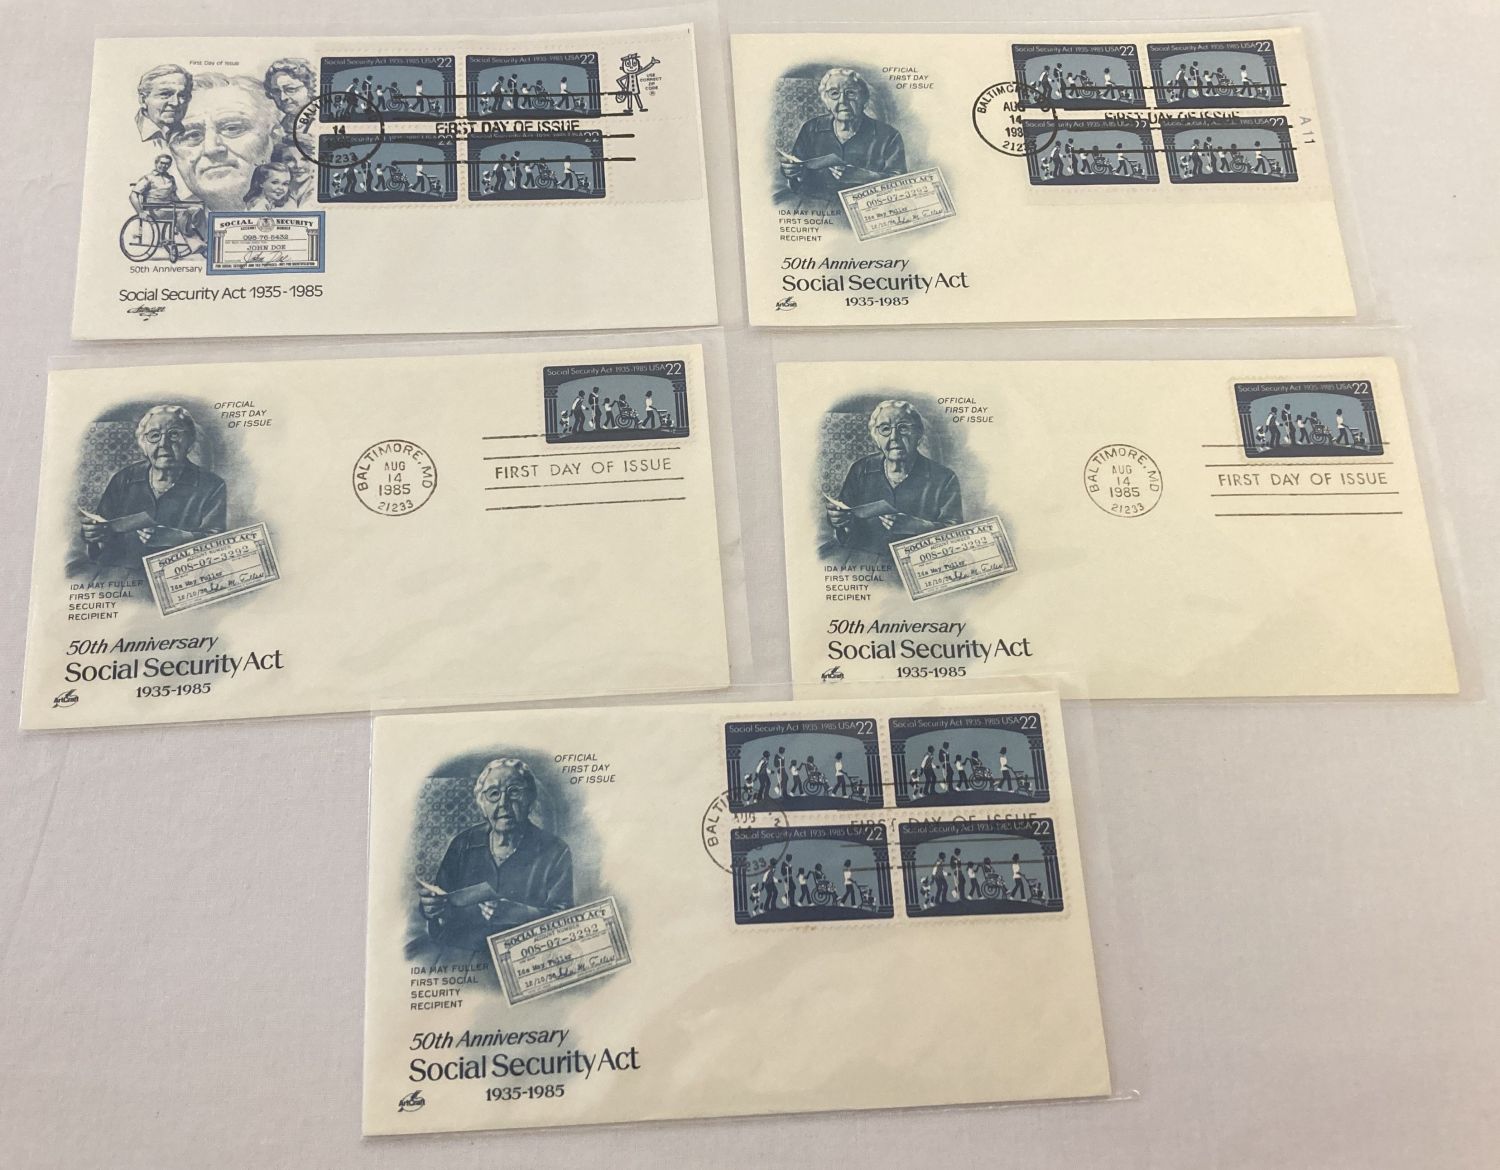 5 American "Social Security Act" first day covers dating from 1985.